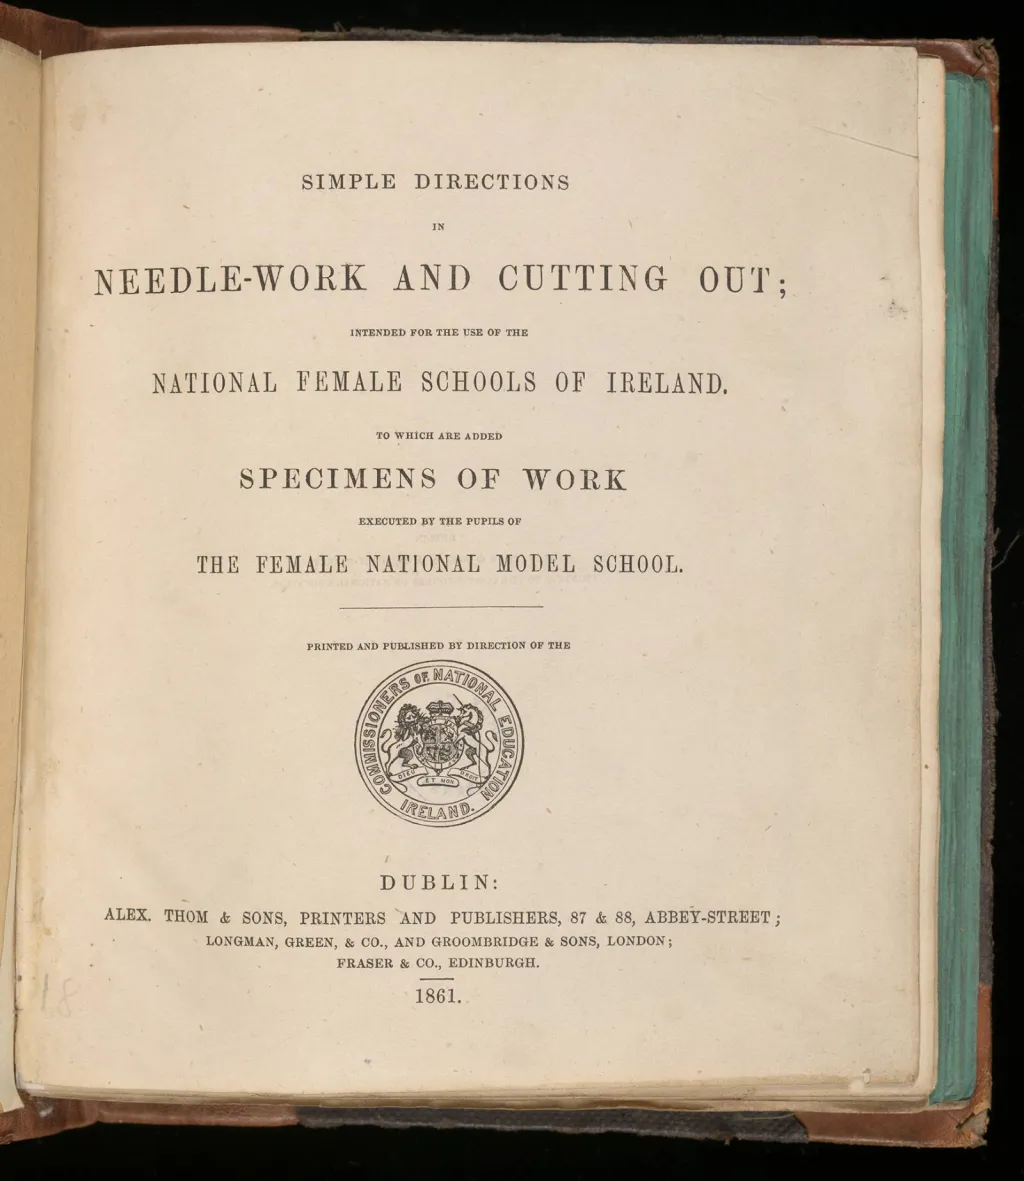 Directions in needlework and textiles for national female schools of Ireland